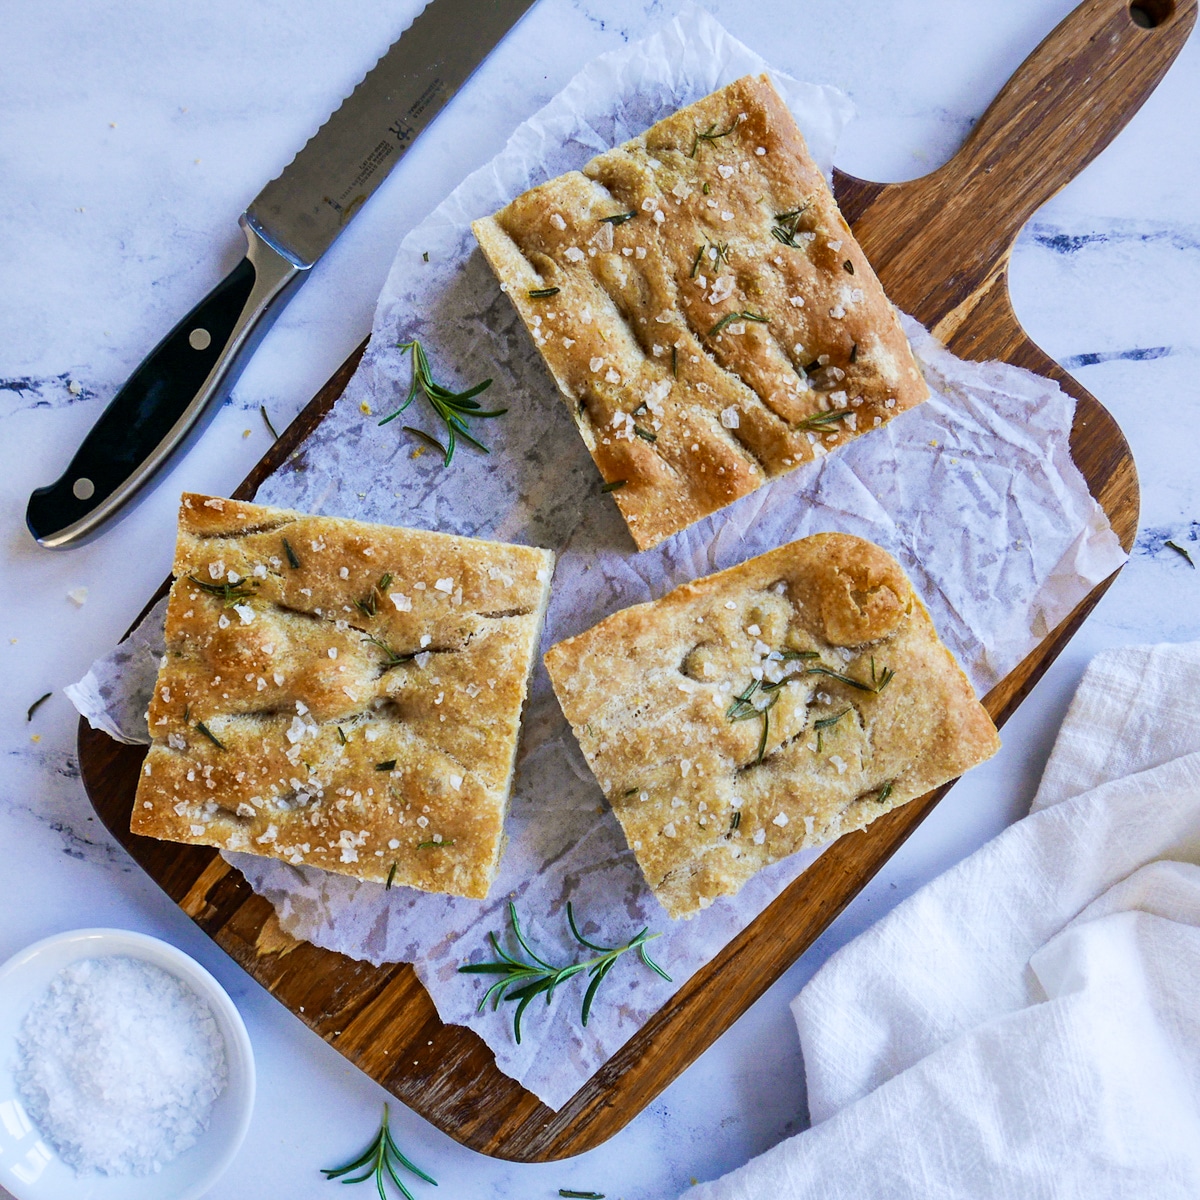 three pieces of focaccia on a wooden cutting board.